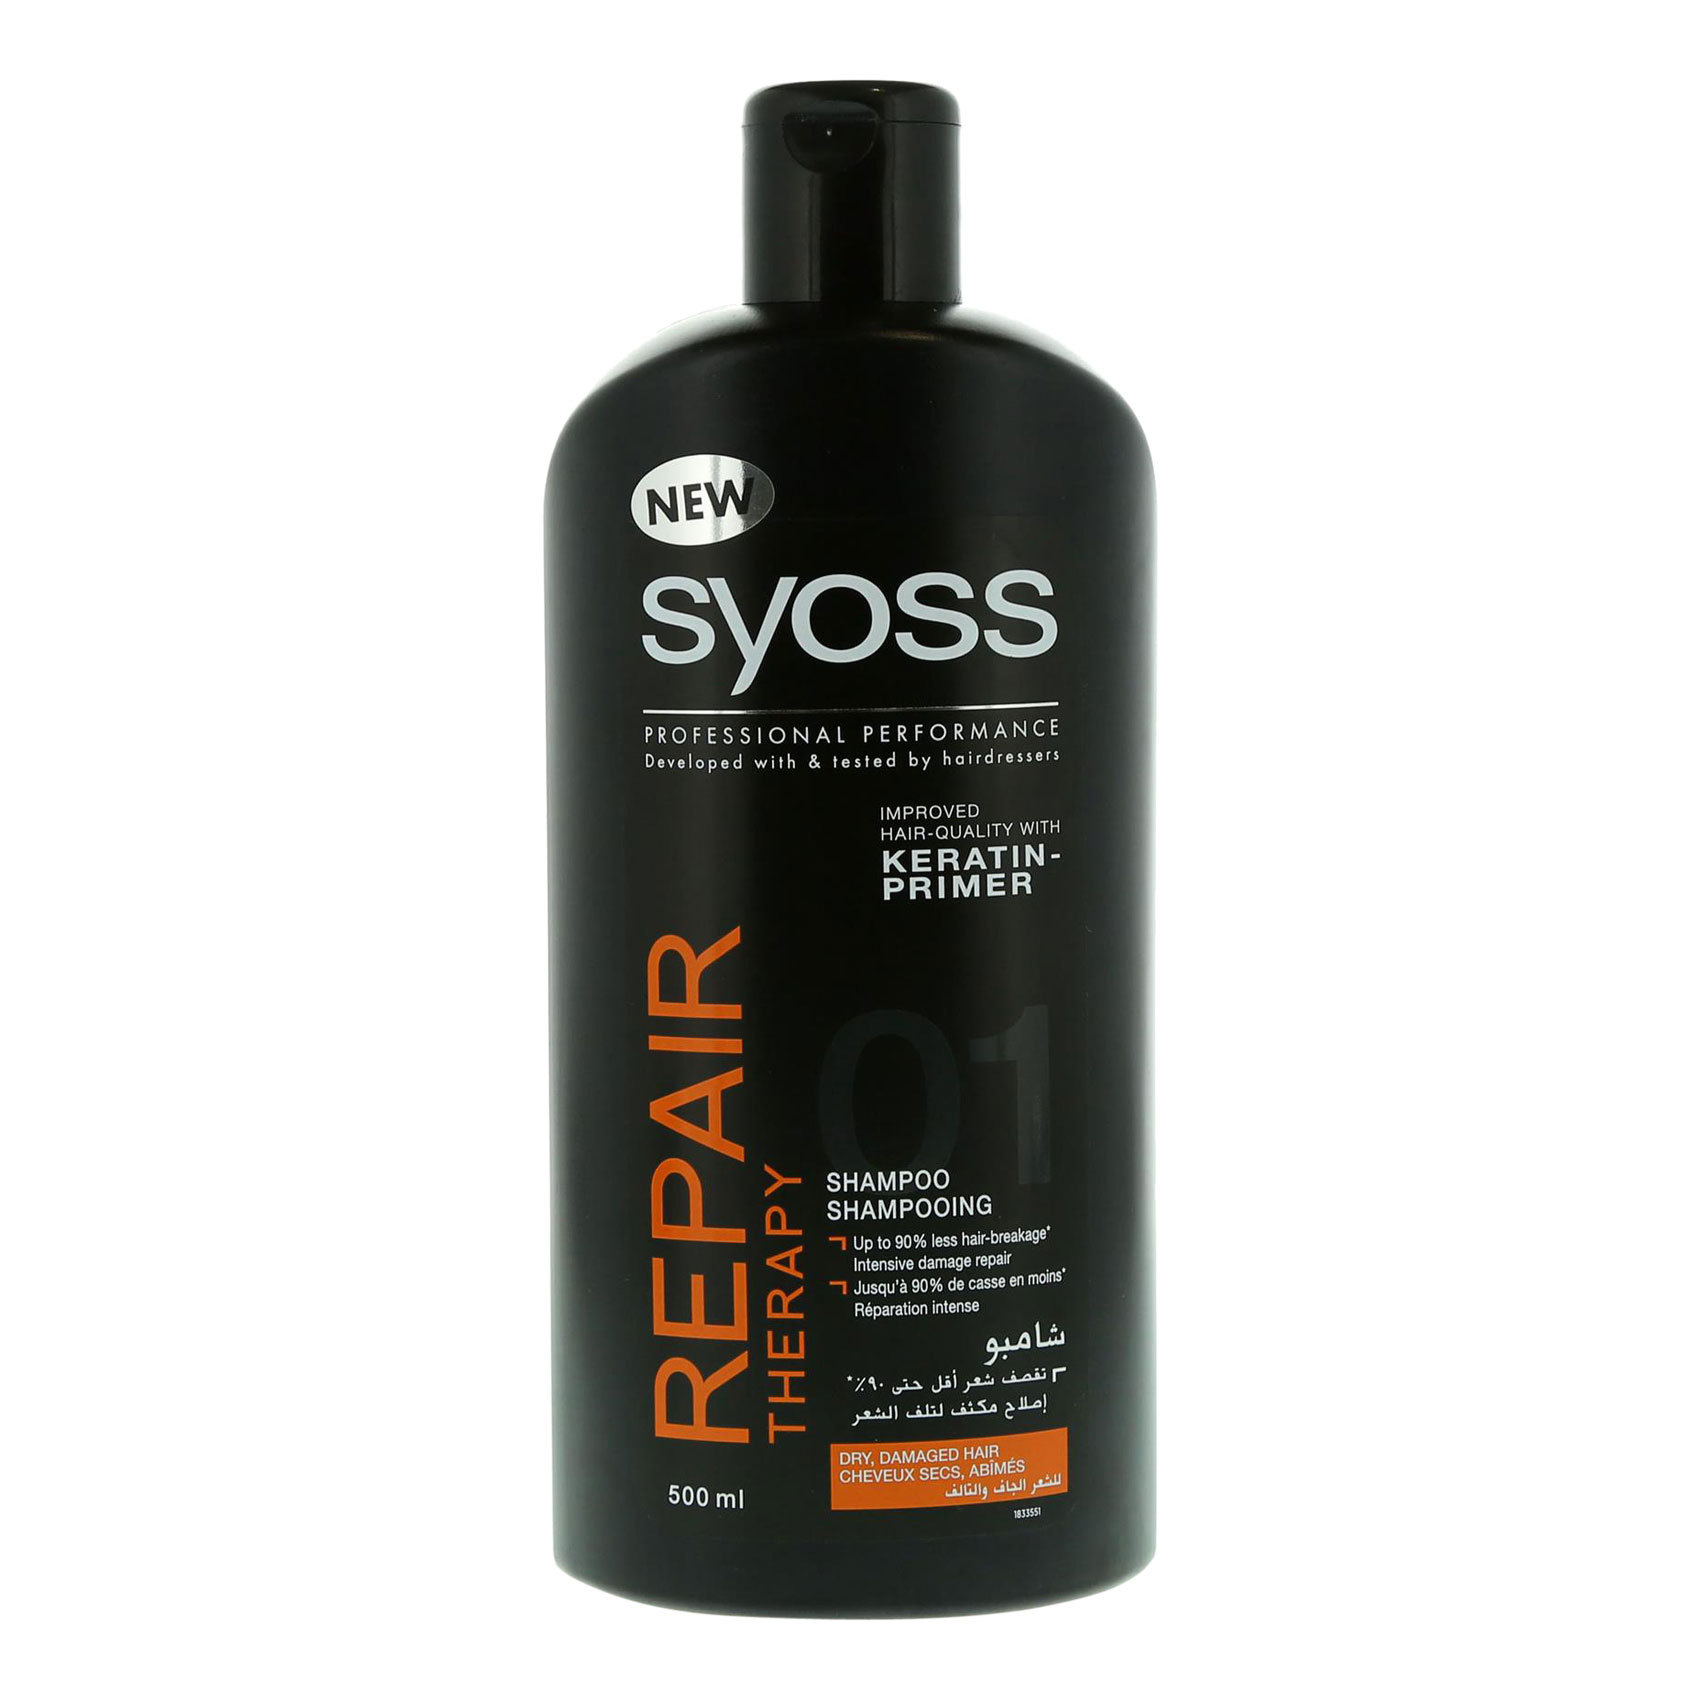 Buy Syoss Keratin Primer Therapy 500ml Online - Shop Beauty & Personal Care on Carrefour UAE